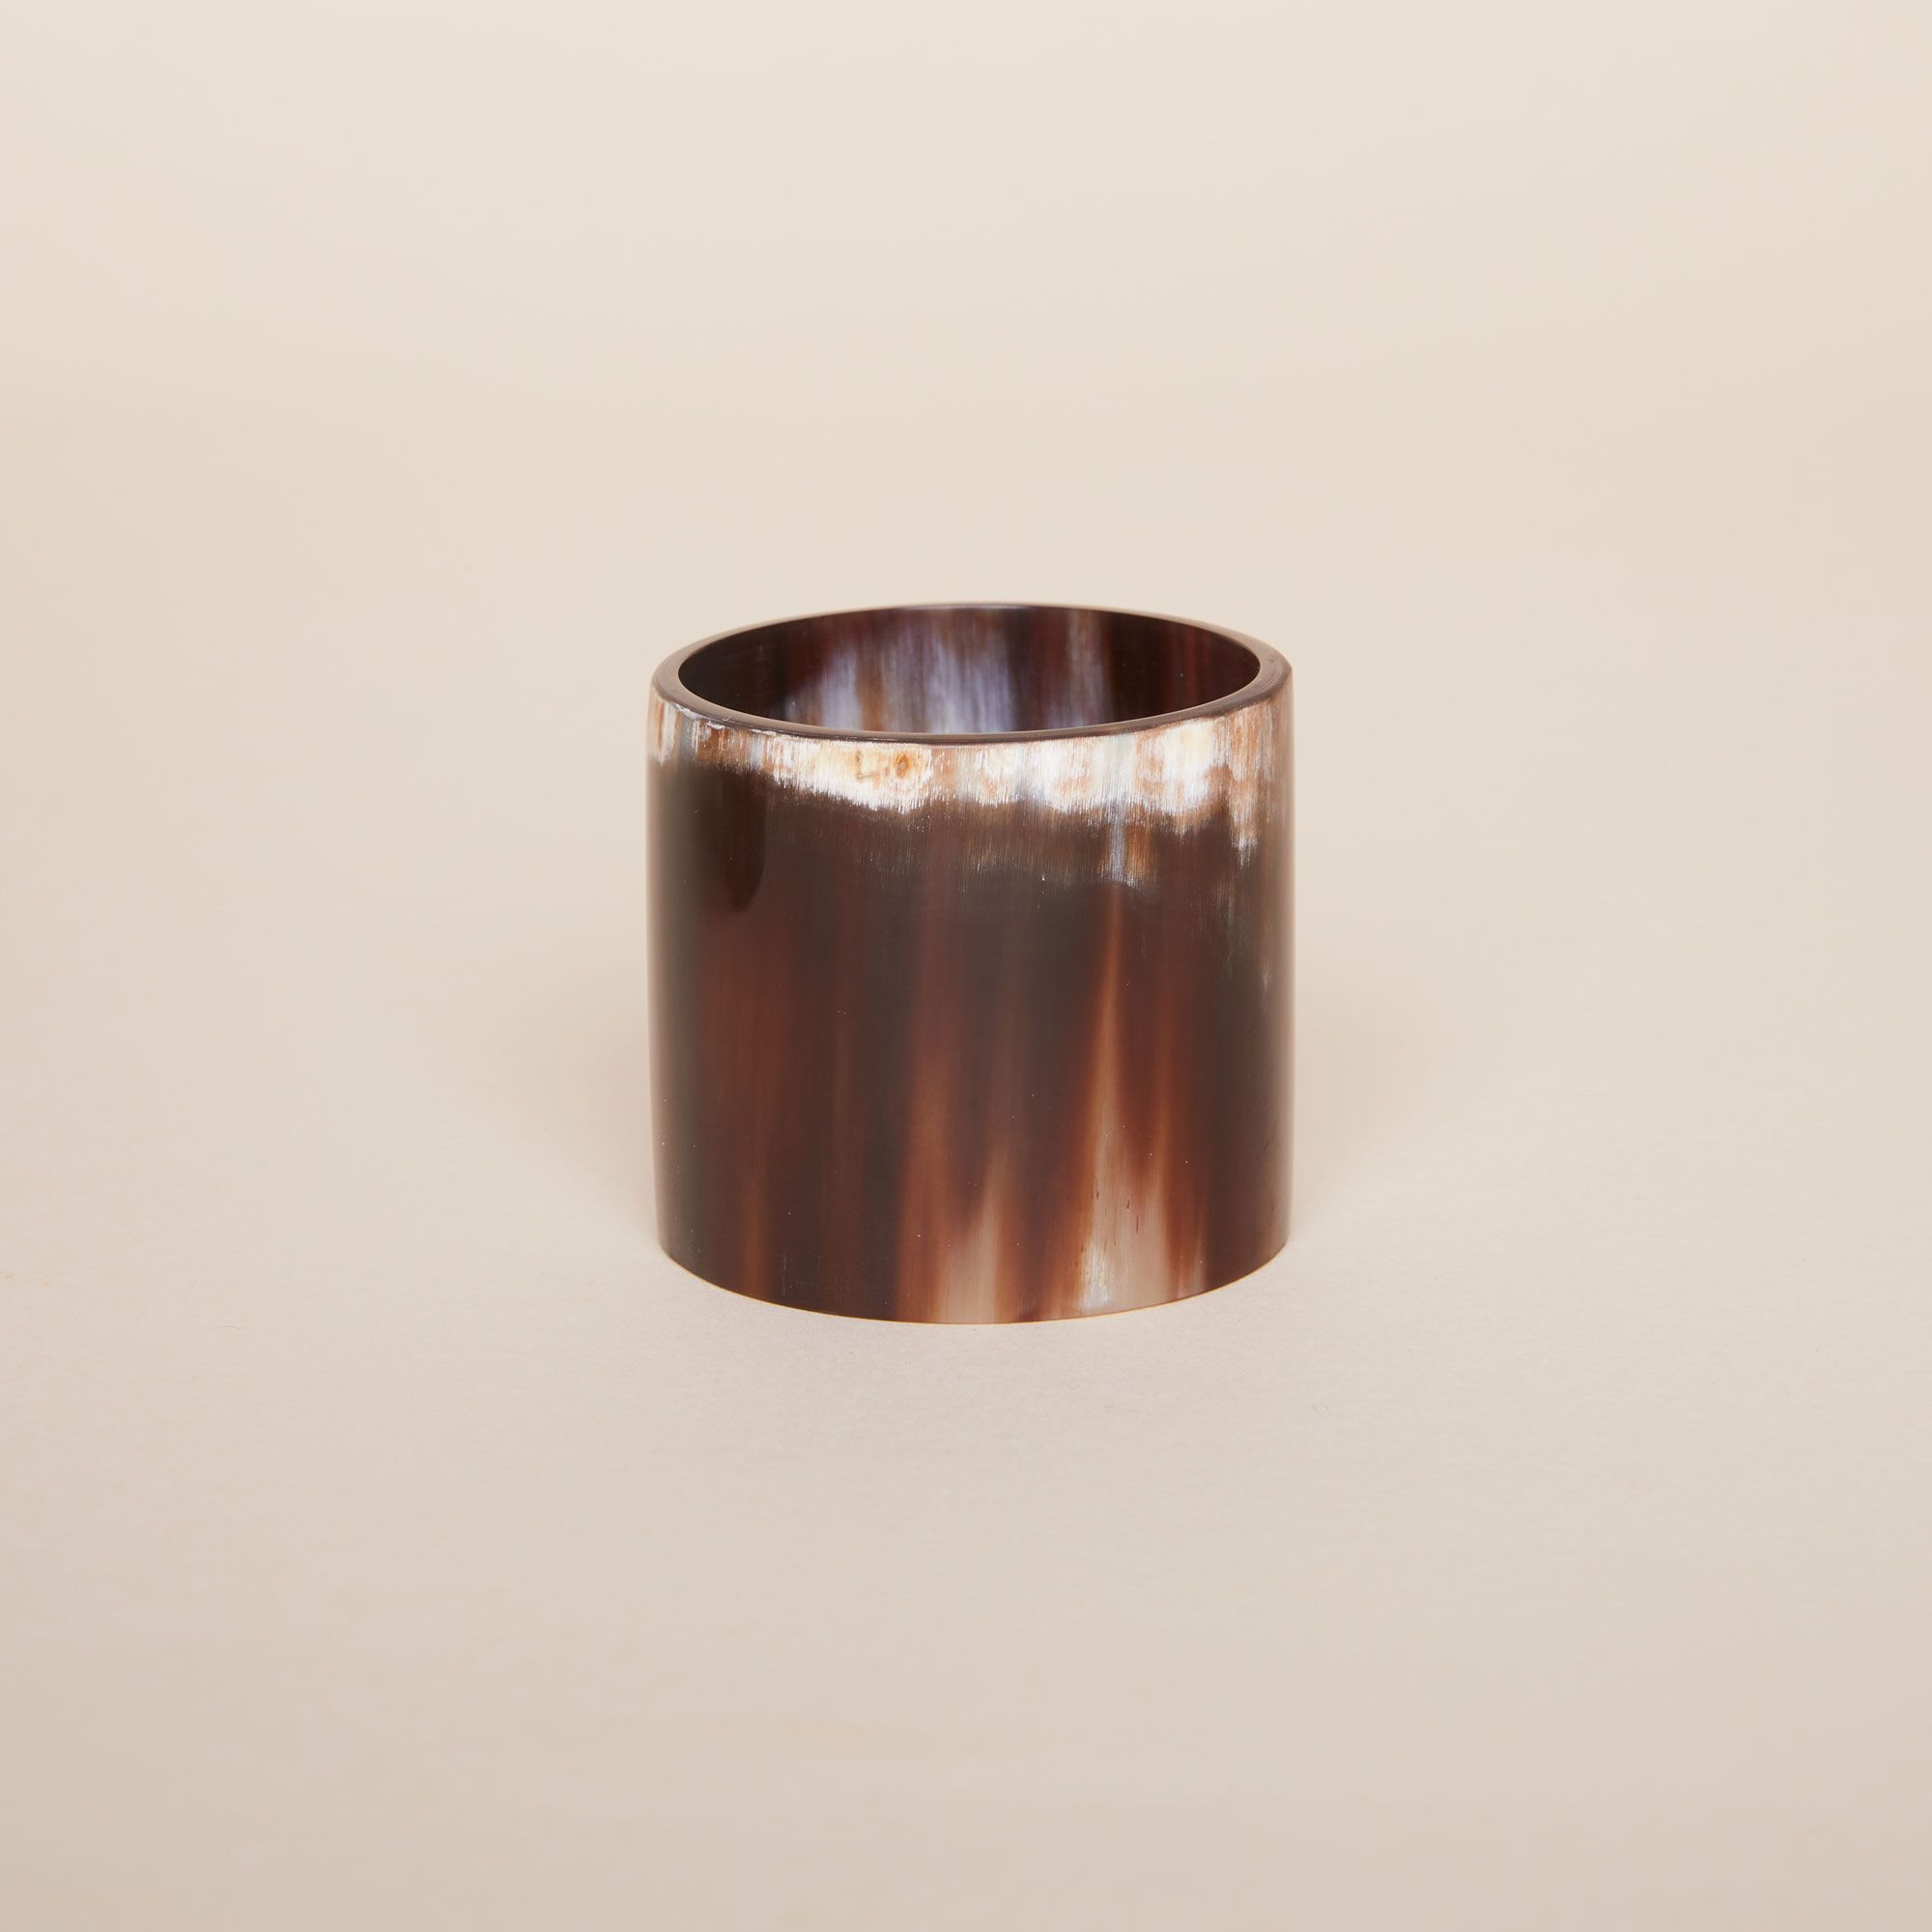 One cylindrical napkin ring, mostly dark brown with touches of white at top and bottom edges